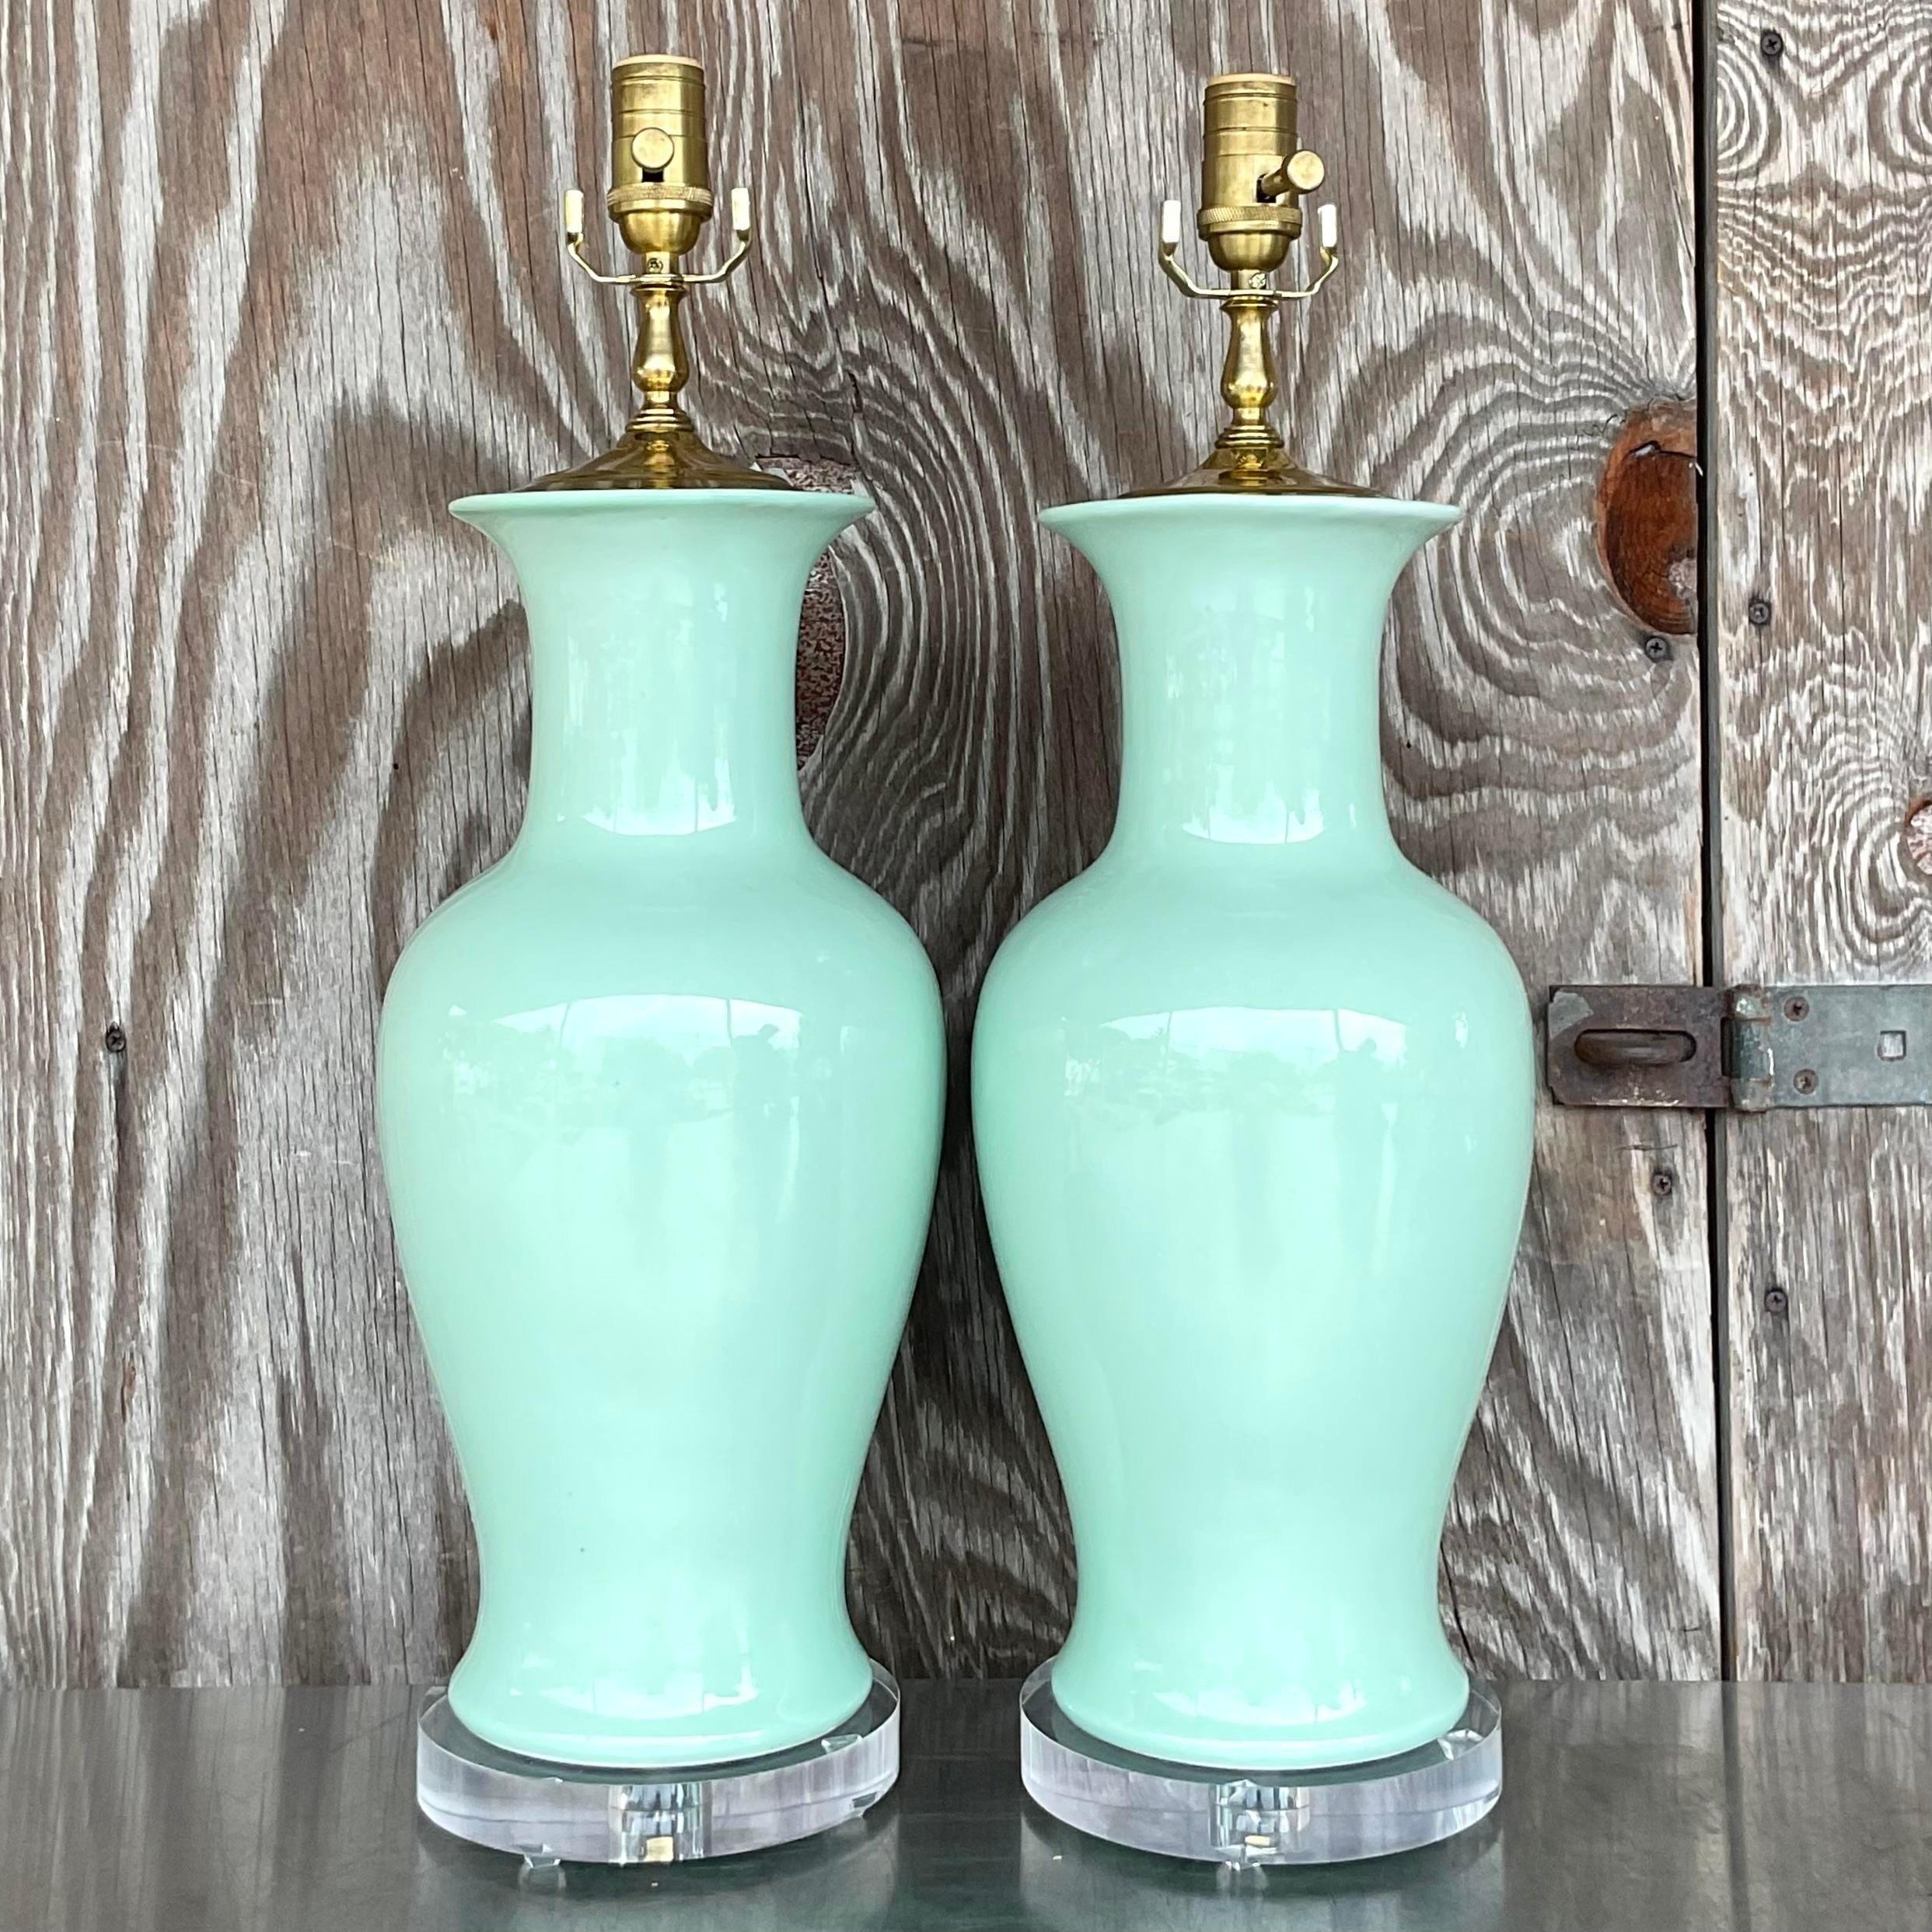 American Vintage Regency Glazed Ceramic Table Lamps - a Pair For Sale